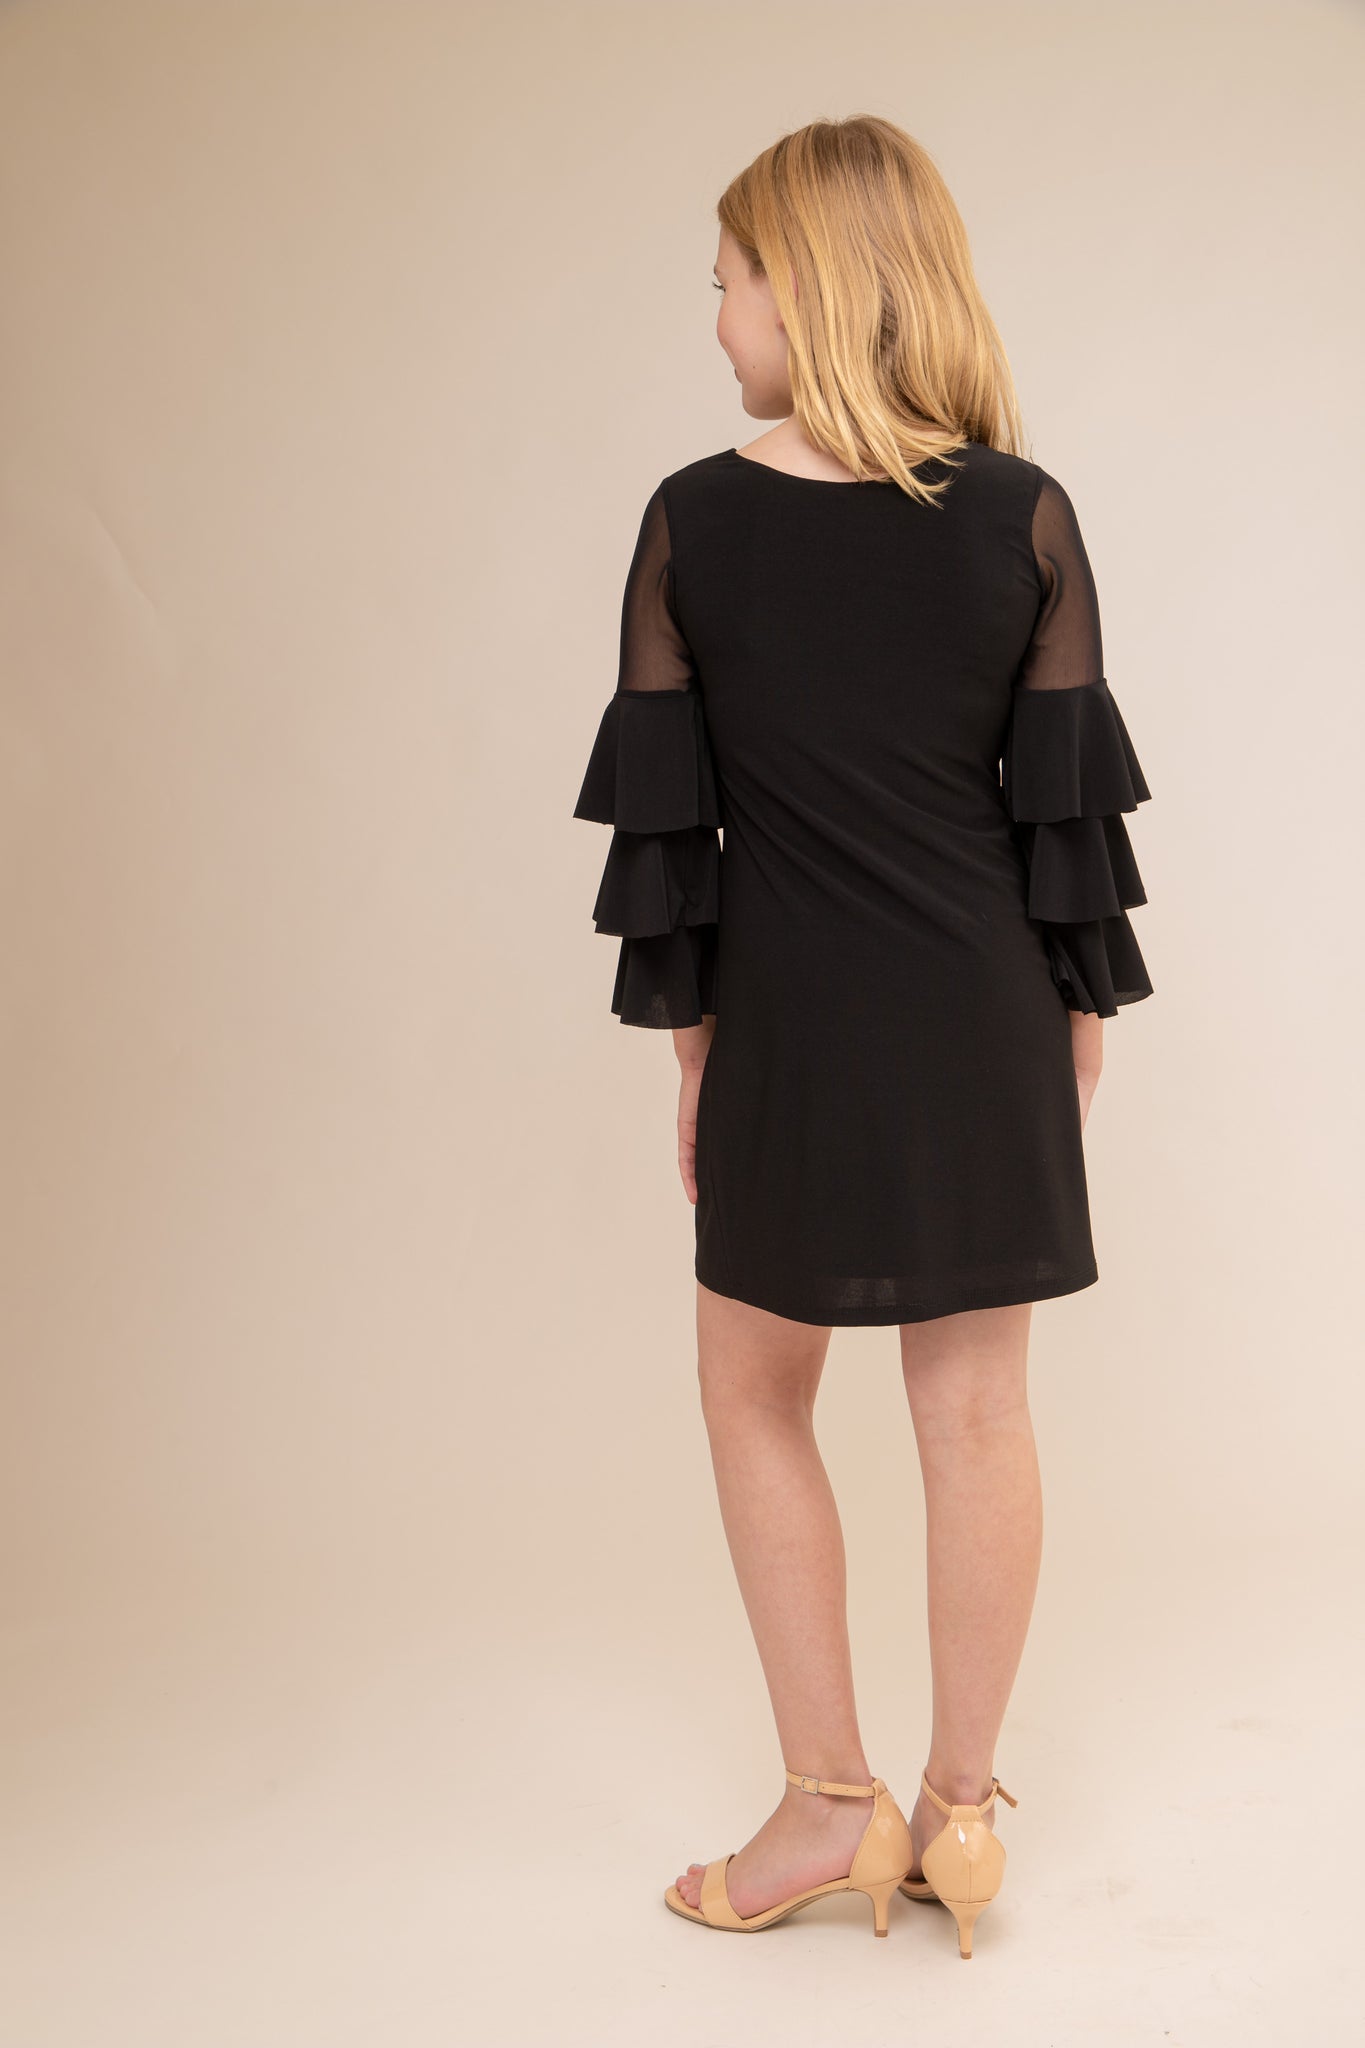 This is an all over stretch, black tiered sleeve dress with mesh detailing on the sleeve. Hits above the knee for a beautiful and chic silhouette.